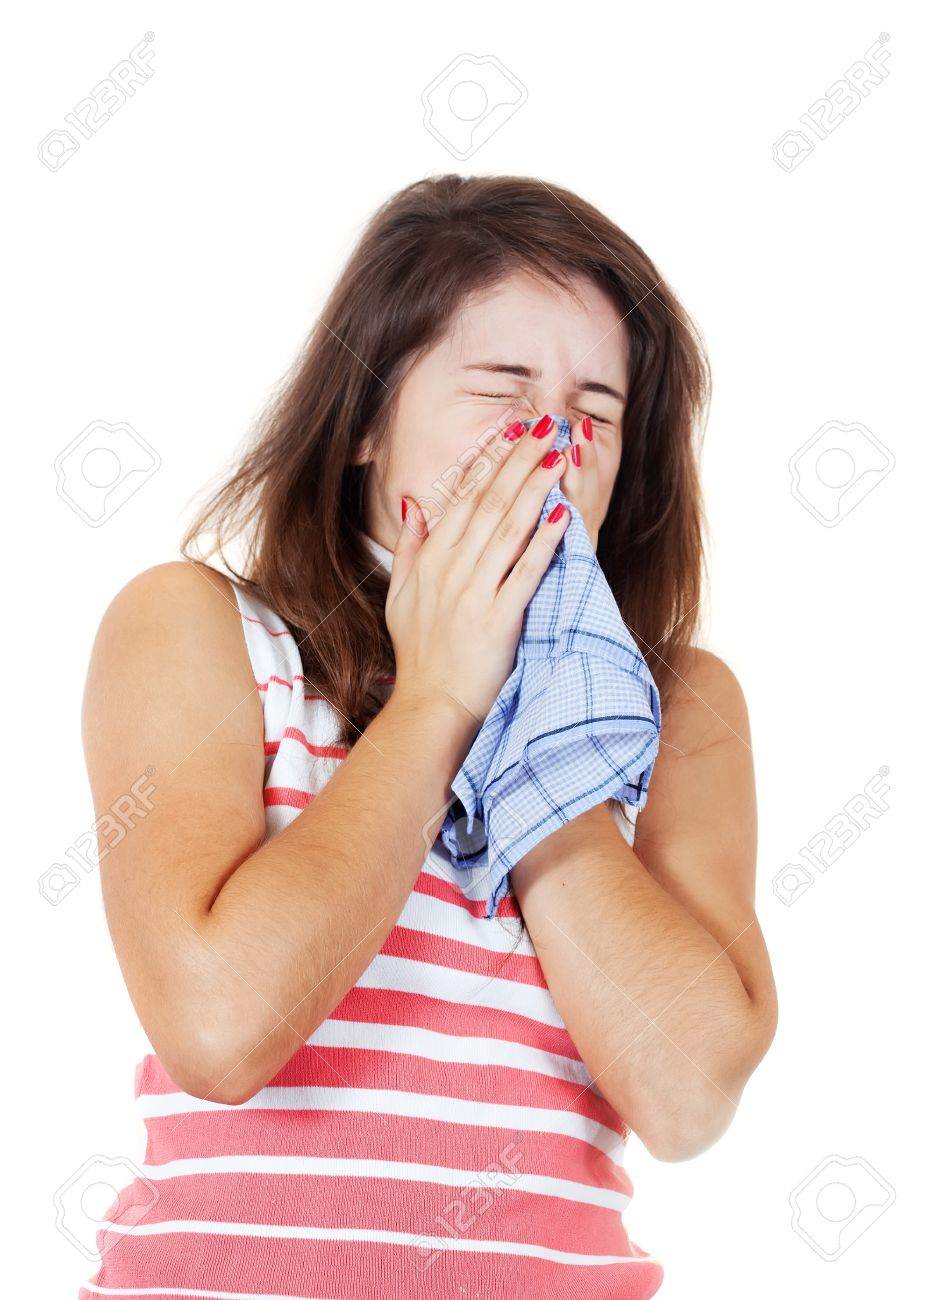 Sneezing Sick Girl With Handkerchief Isolated On White Background